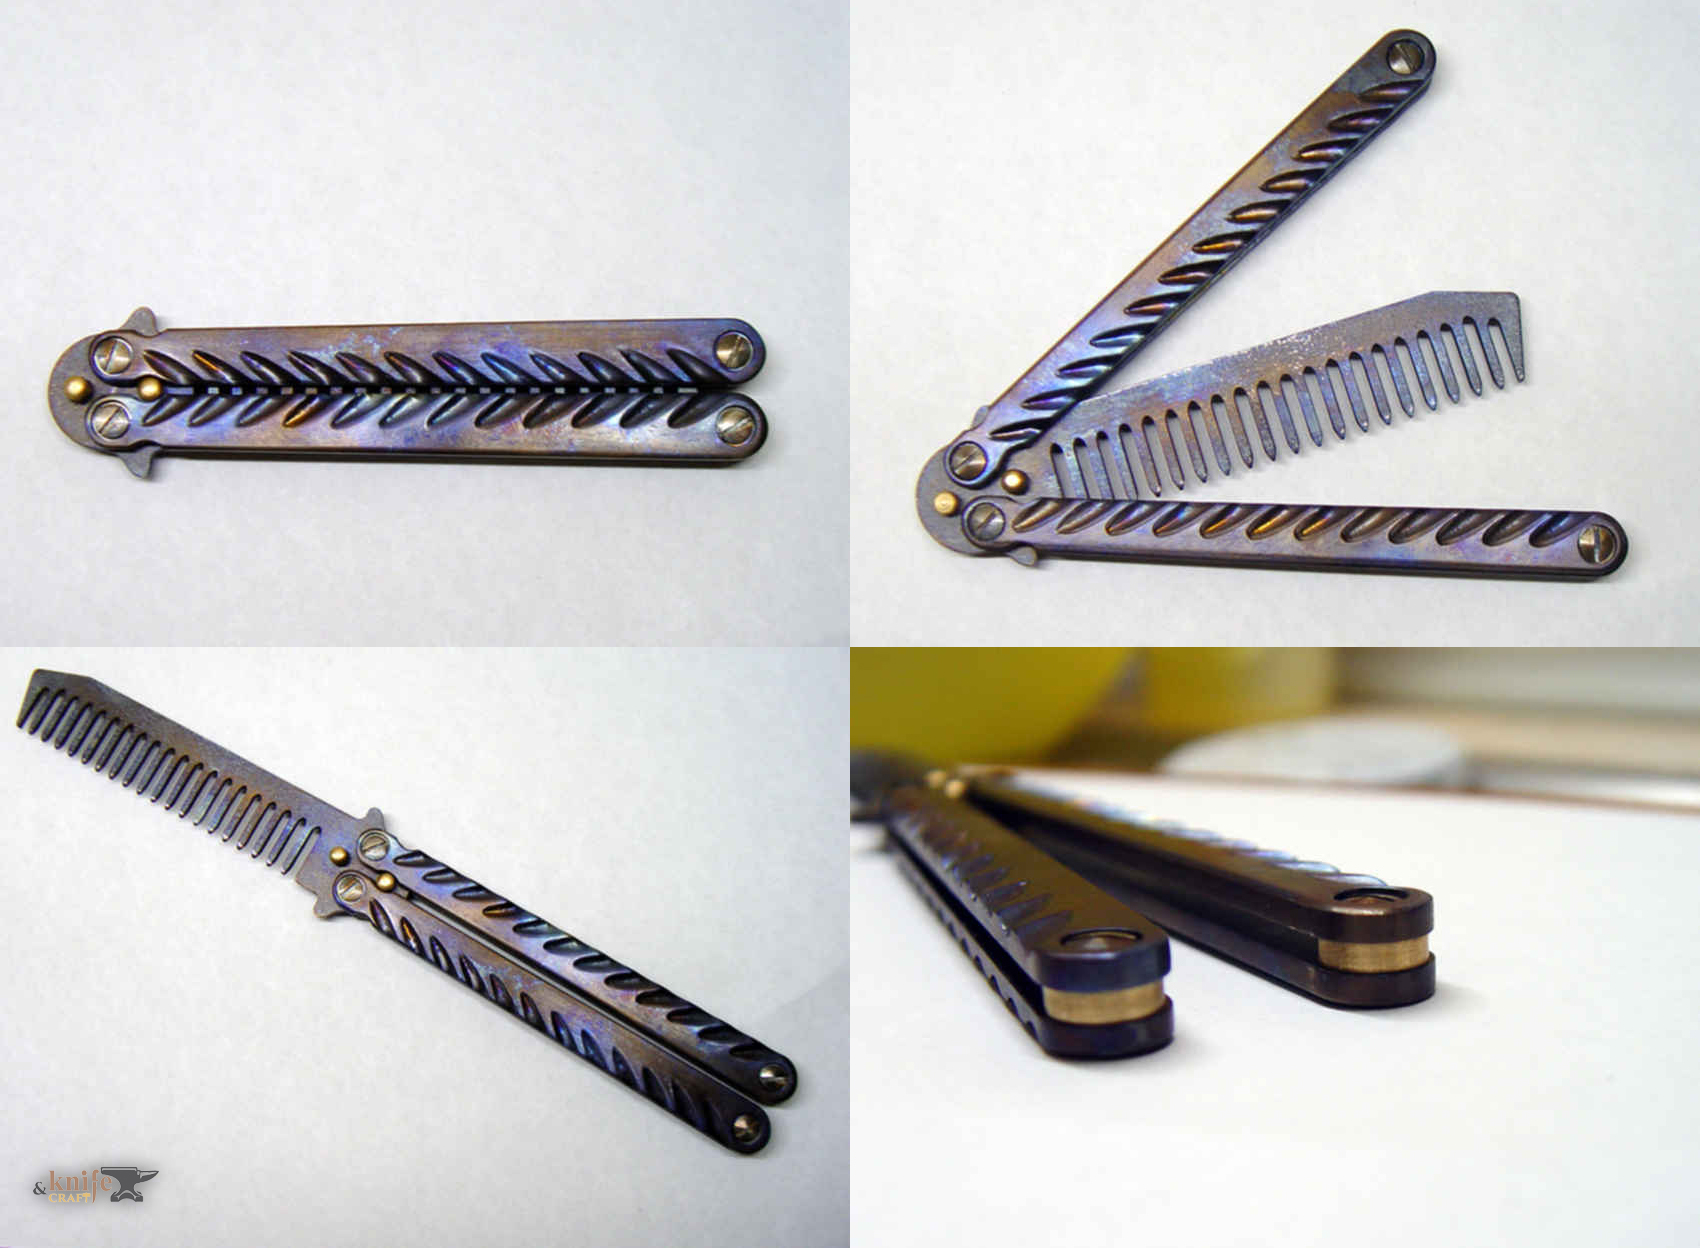 folding butterfly hairbrush (balisong) made of titanium